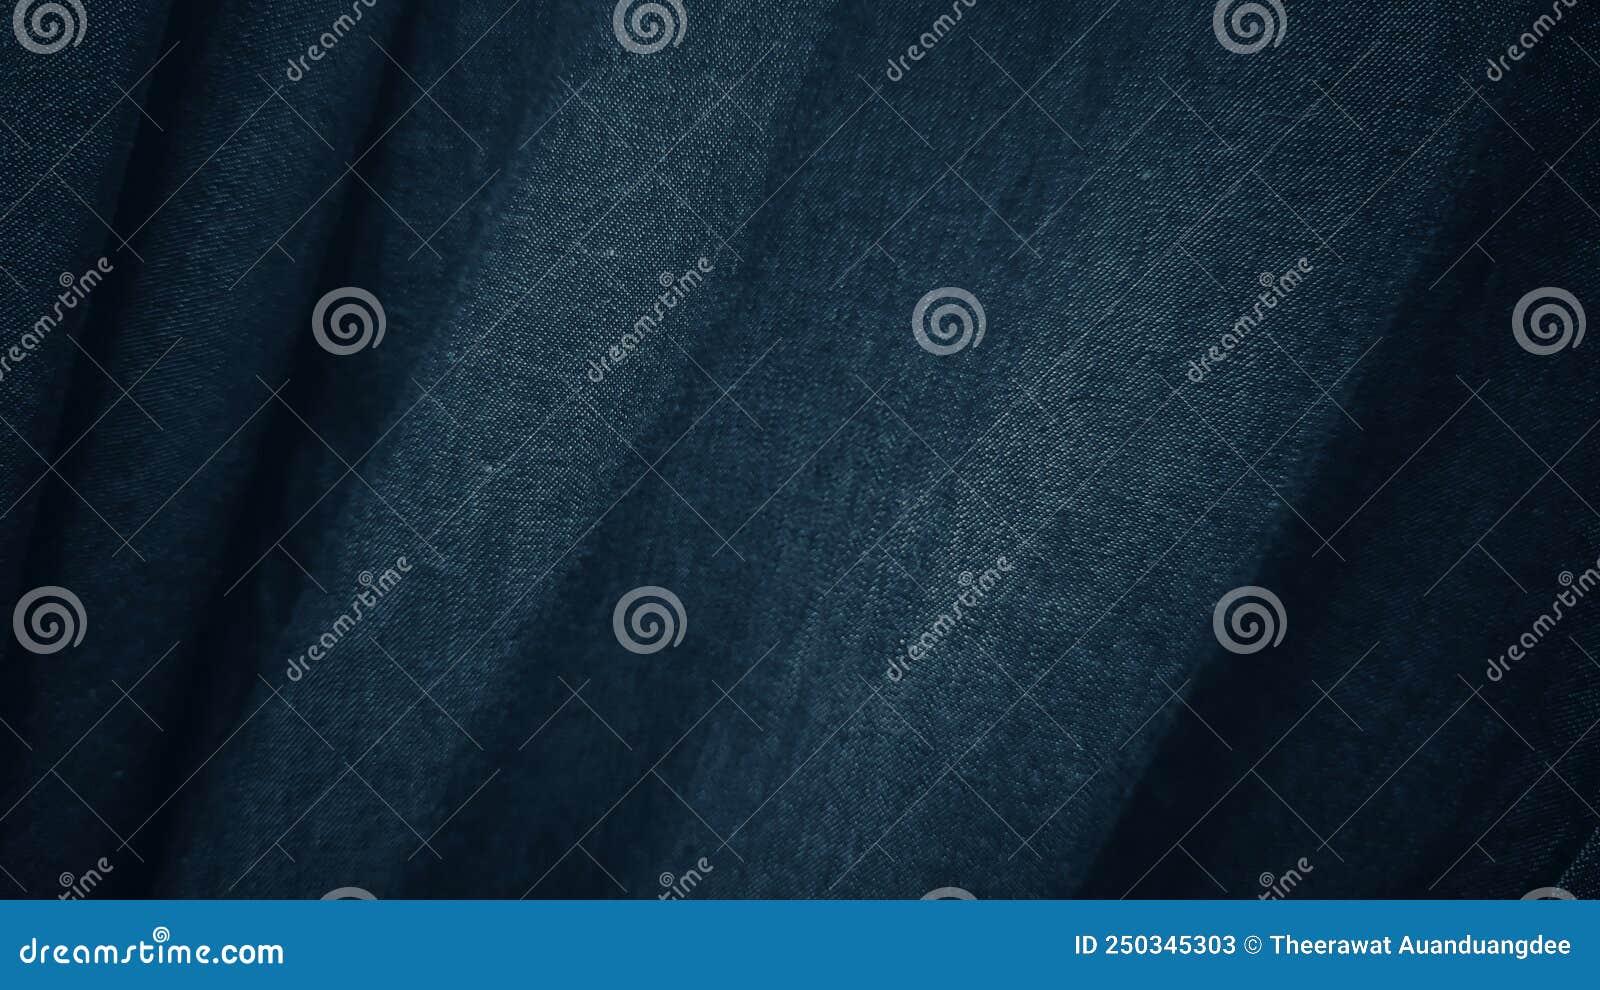 Fabric Patterns and Textures for Dark and Abstract Backgrounds. Stock ...